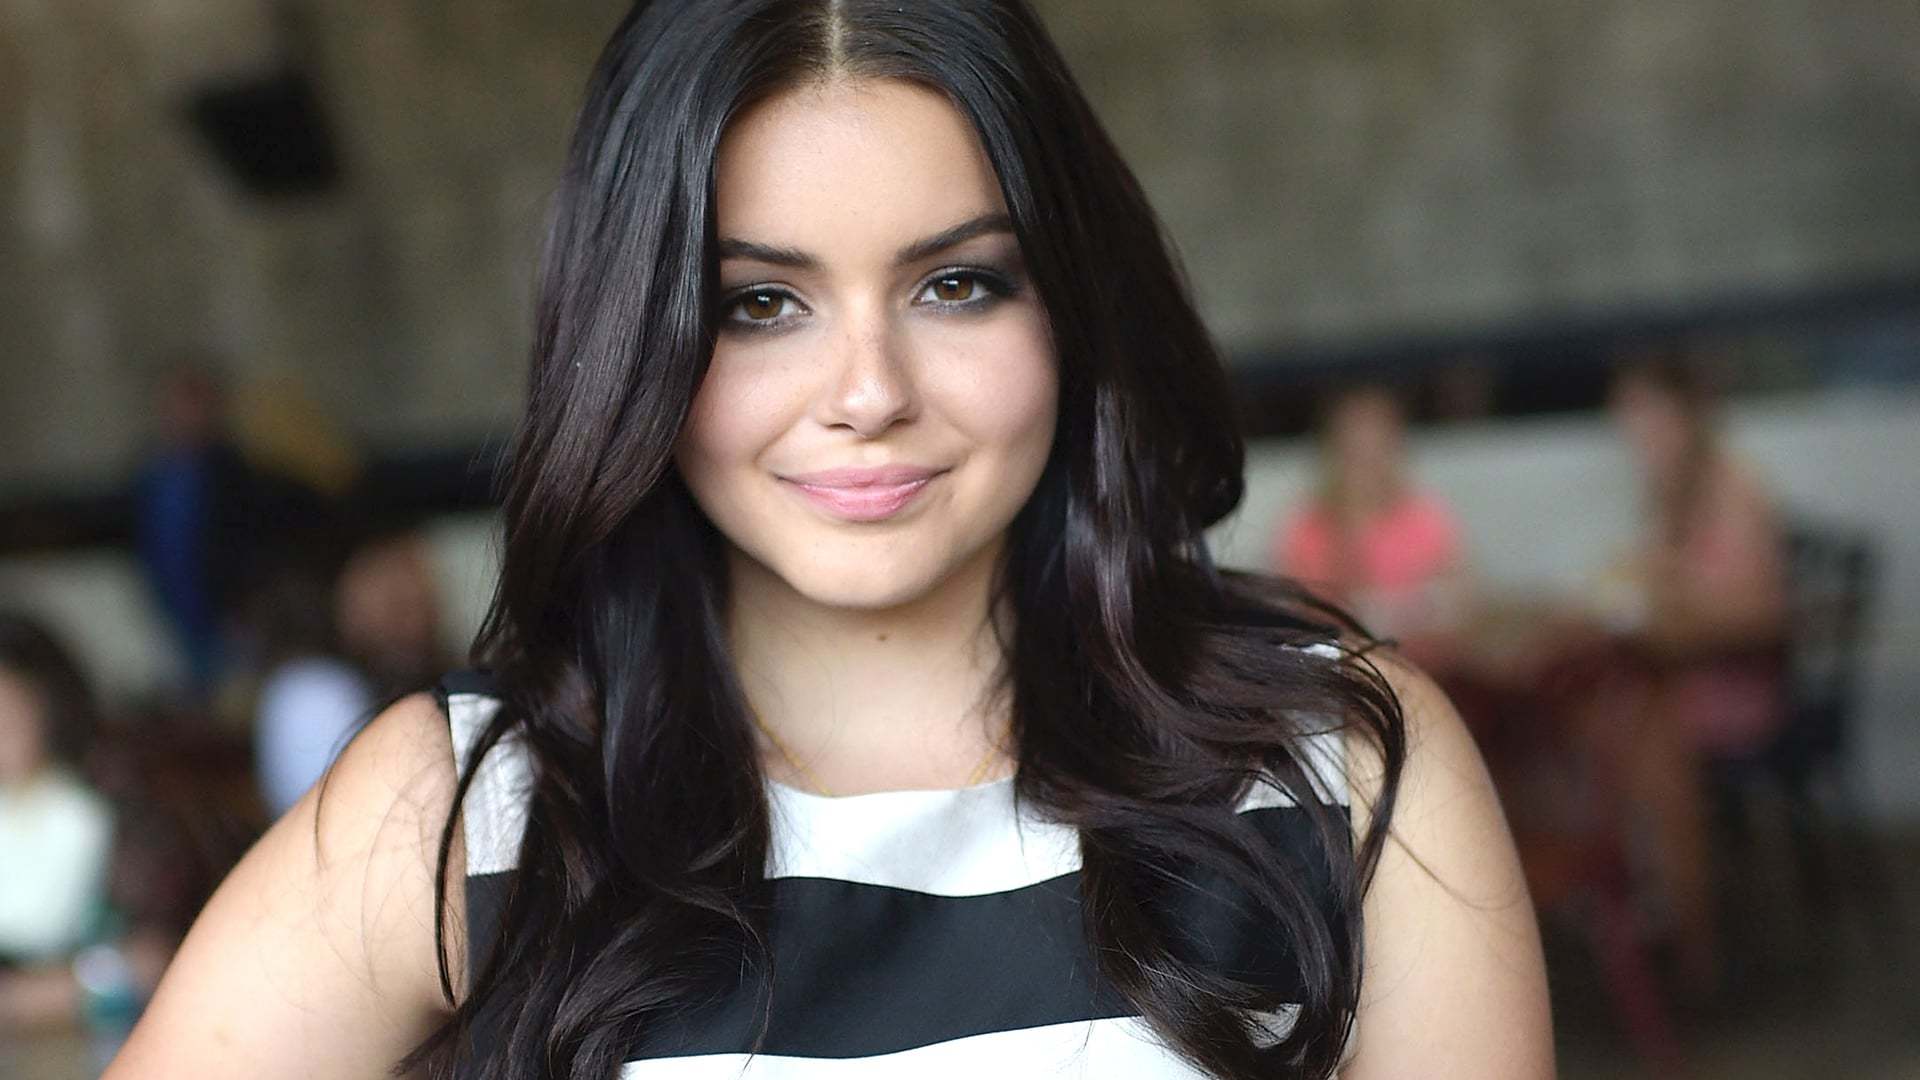 Ariel Winter Wallpaper Image Photo Picture Background